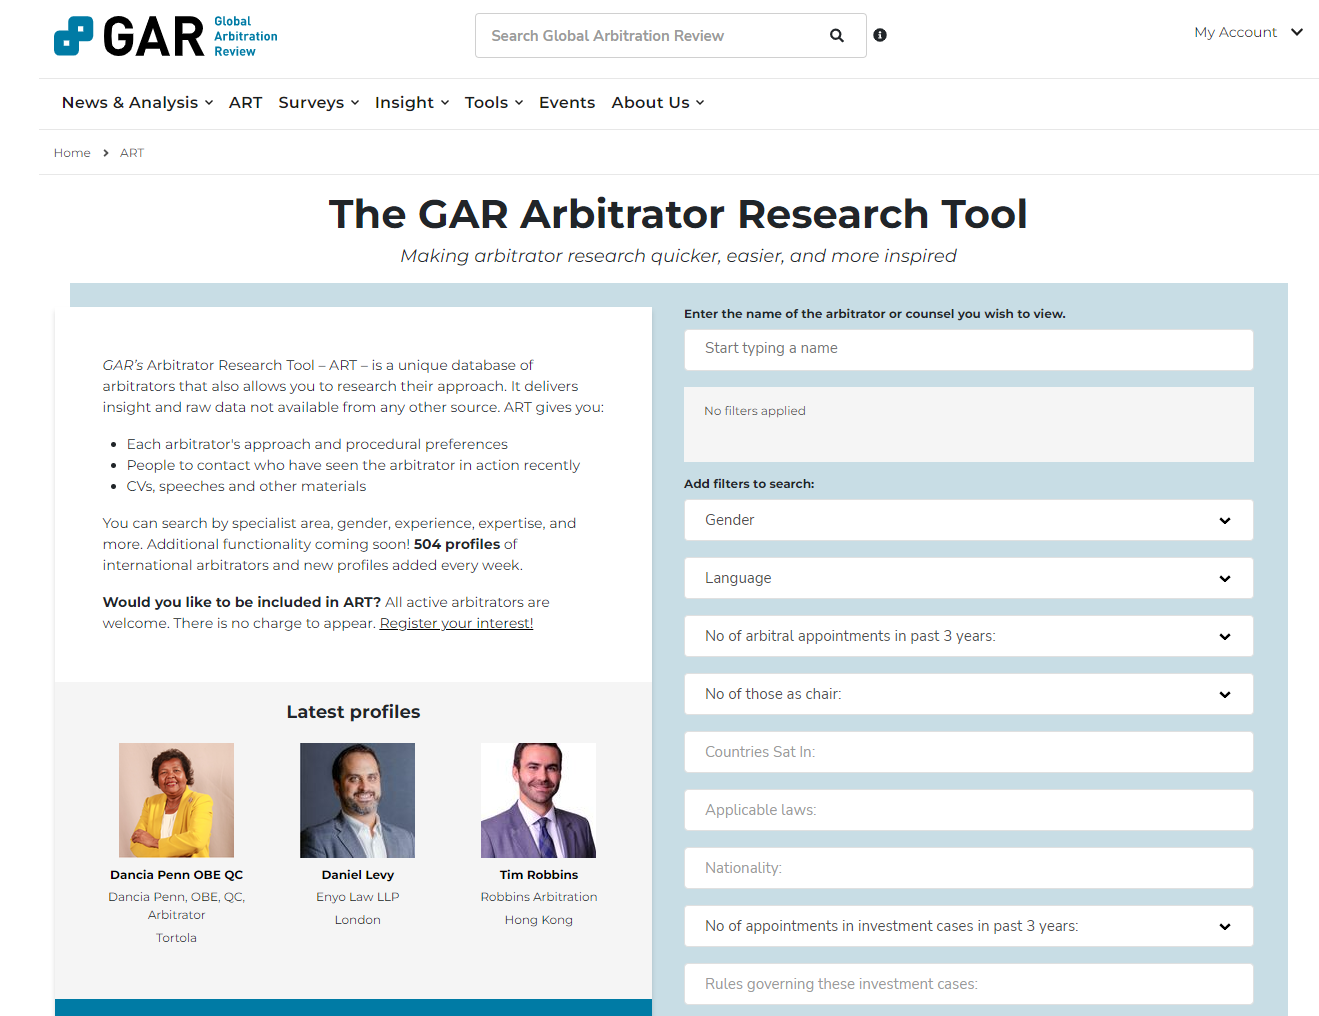 Interface showing GAR's Arbitrator Research Tool